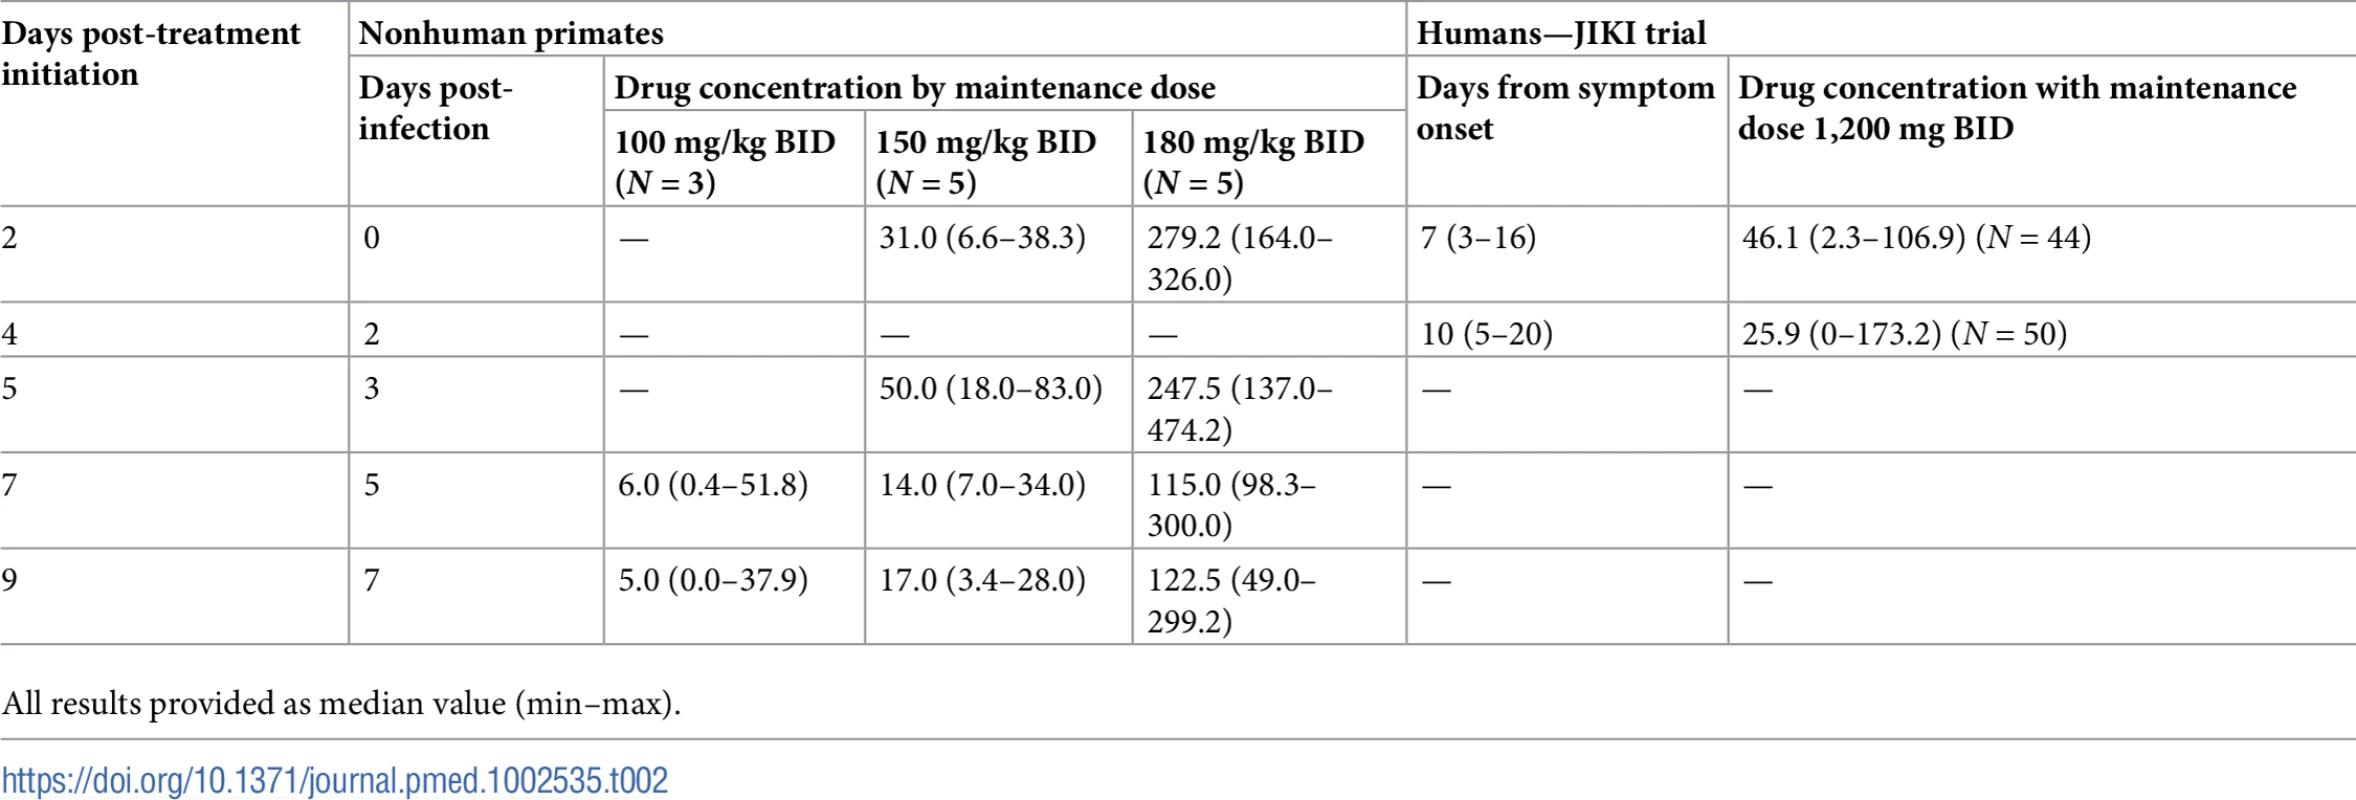 Drug concentrations observed in nonhuman primates compared to what was observed in humans in the JIKI trial [<em class=&quot;ref&quot;>12</em>].